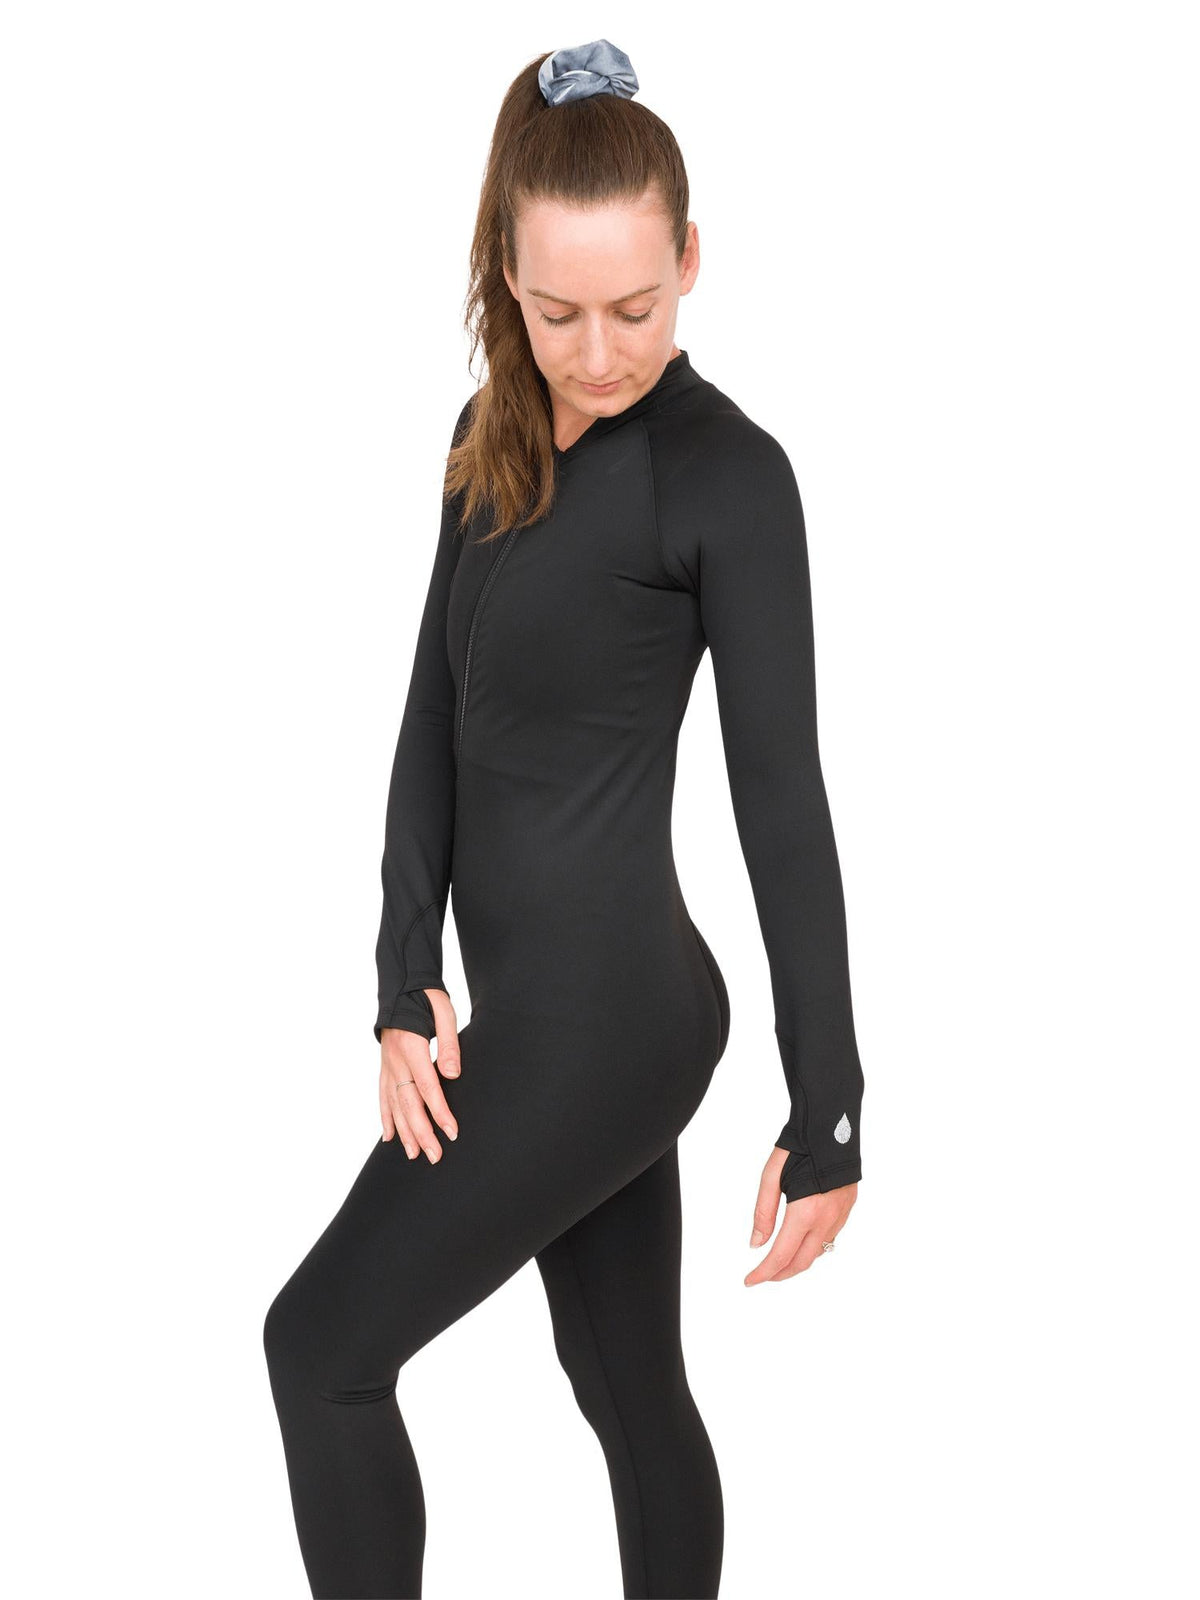 Model: Laura is our Chief Product Officer at Waterlust, a scuba diver, kiter and recreational yogi. She is 5’10, 147 lbs, 34B and is wearing a M full body sun suit.